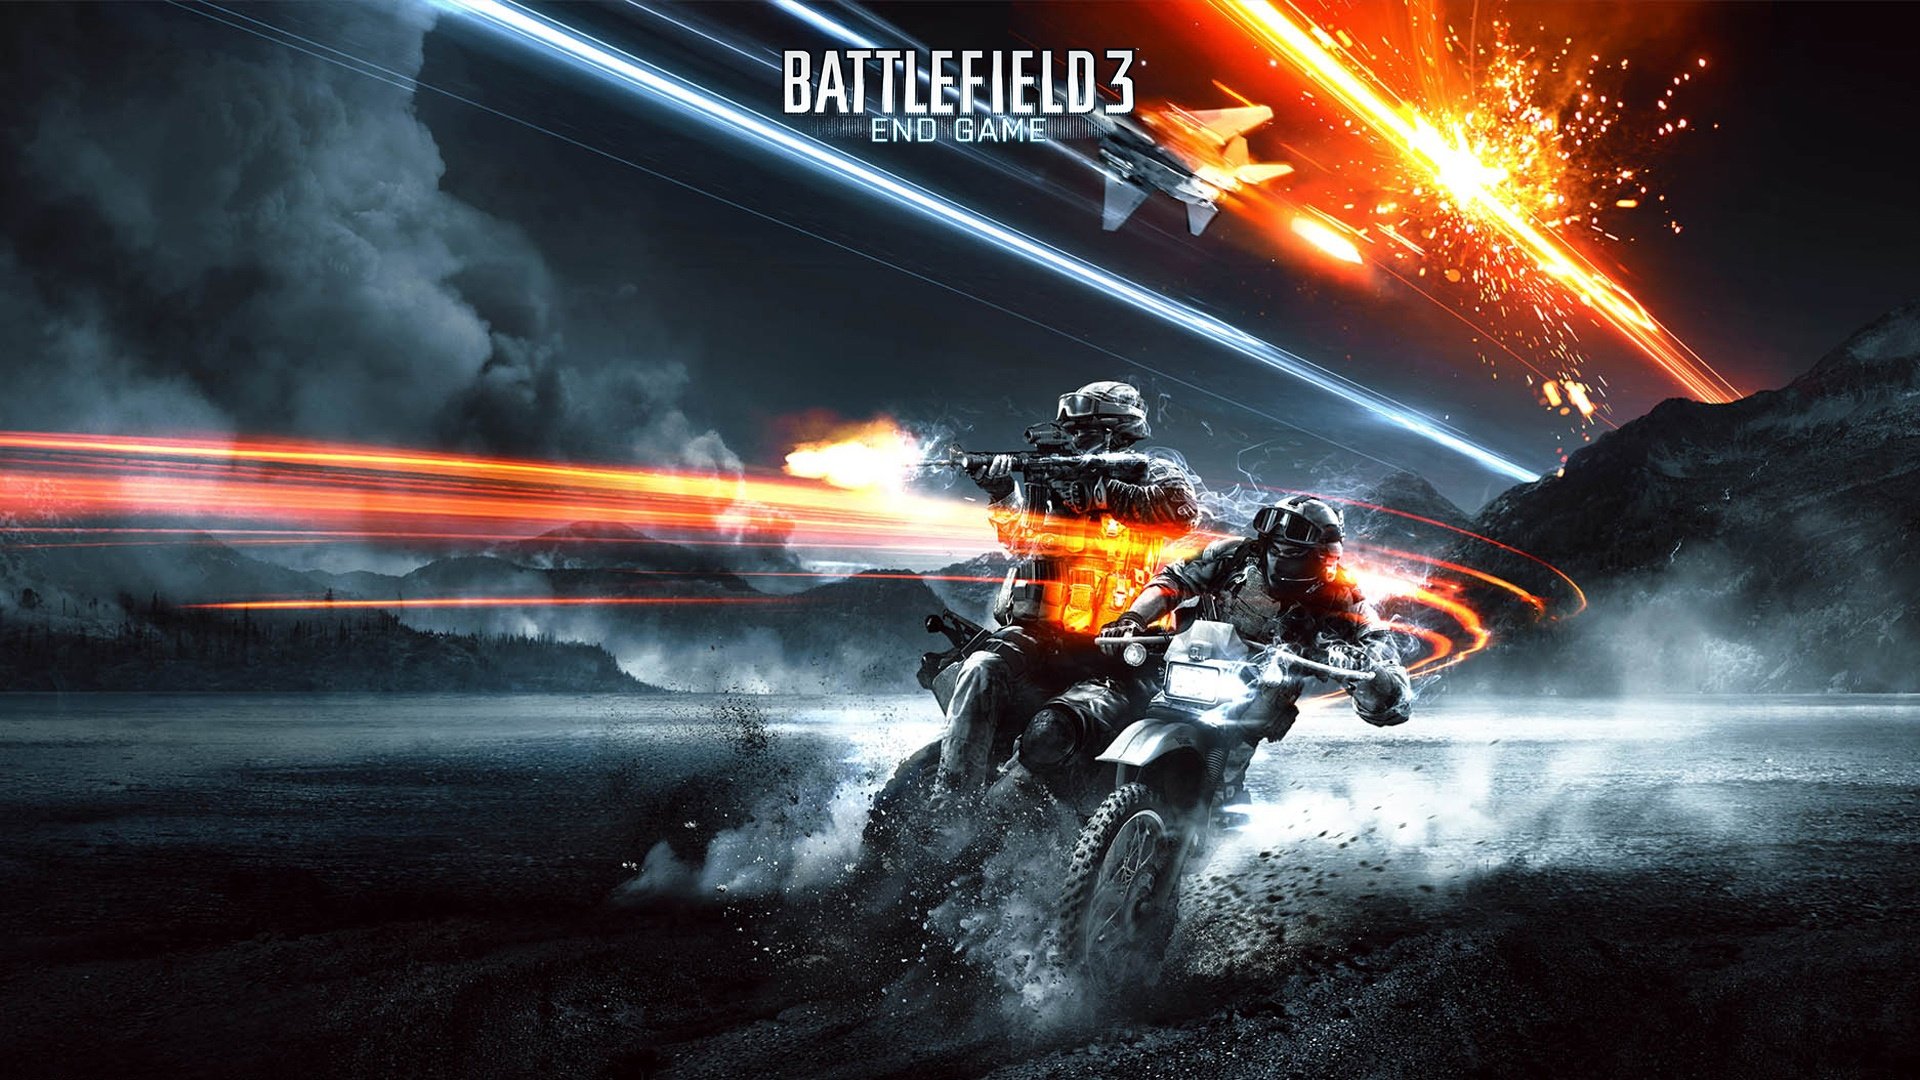 Battlefield 3 End Game Wallpapers HD Wallpapers 1920x1080